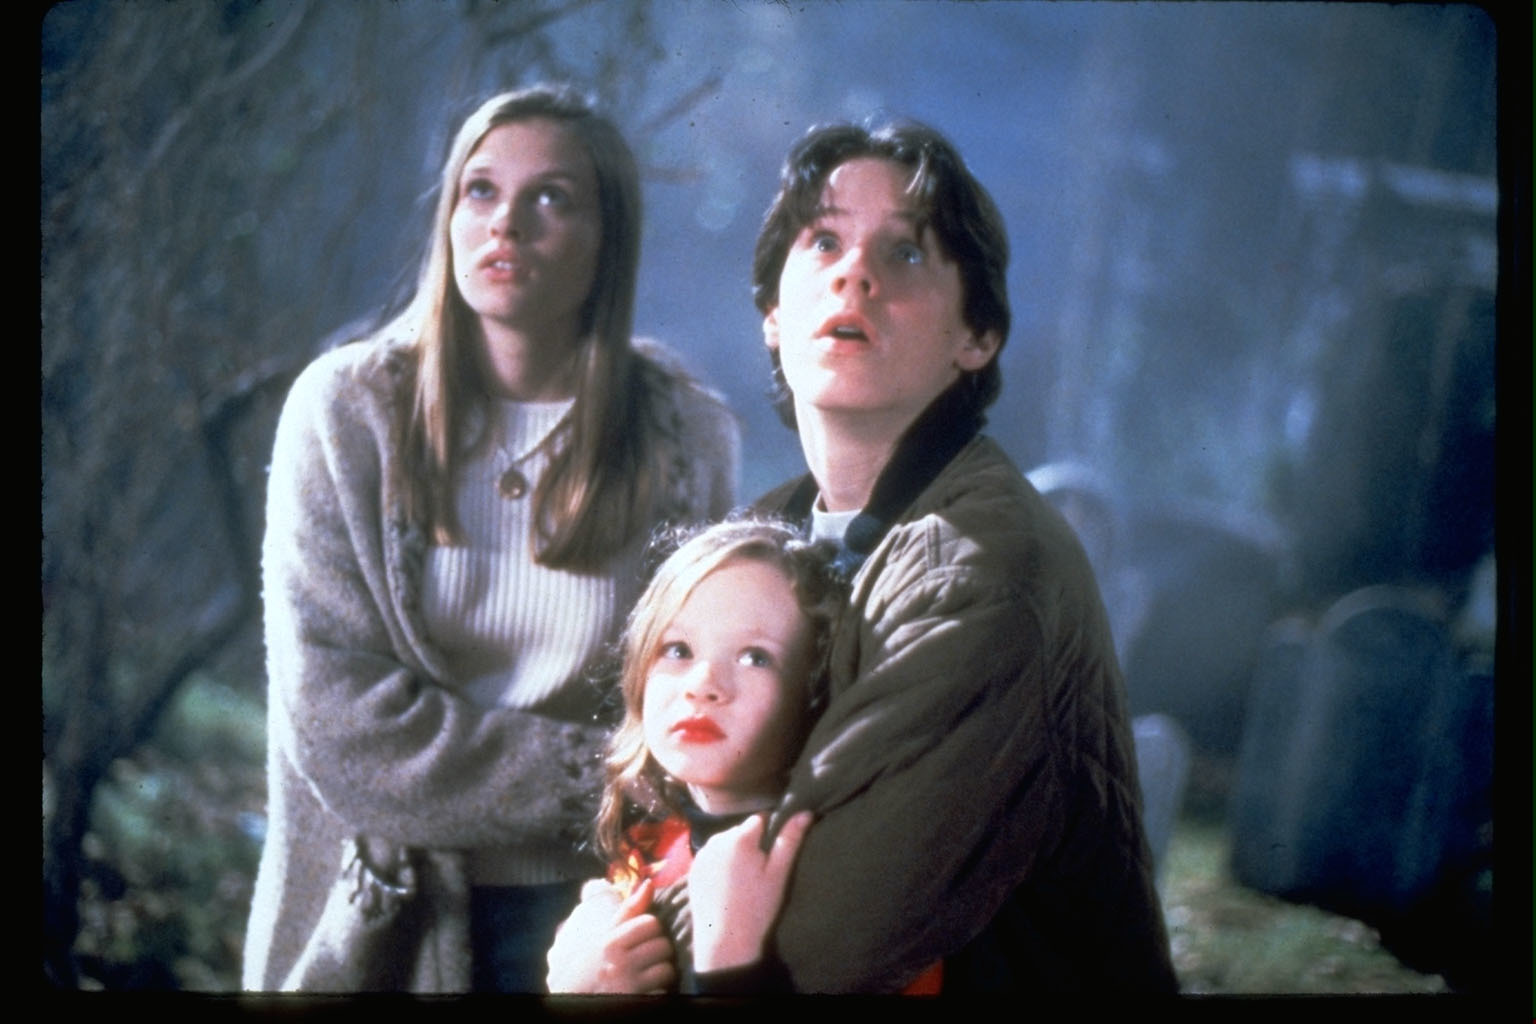 21 Best Scary Movies For Kids That Make For A Spooky Night In